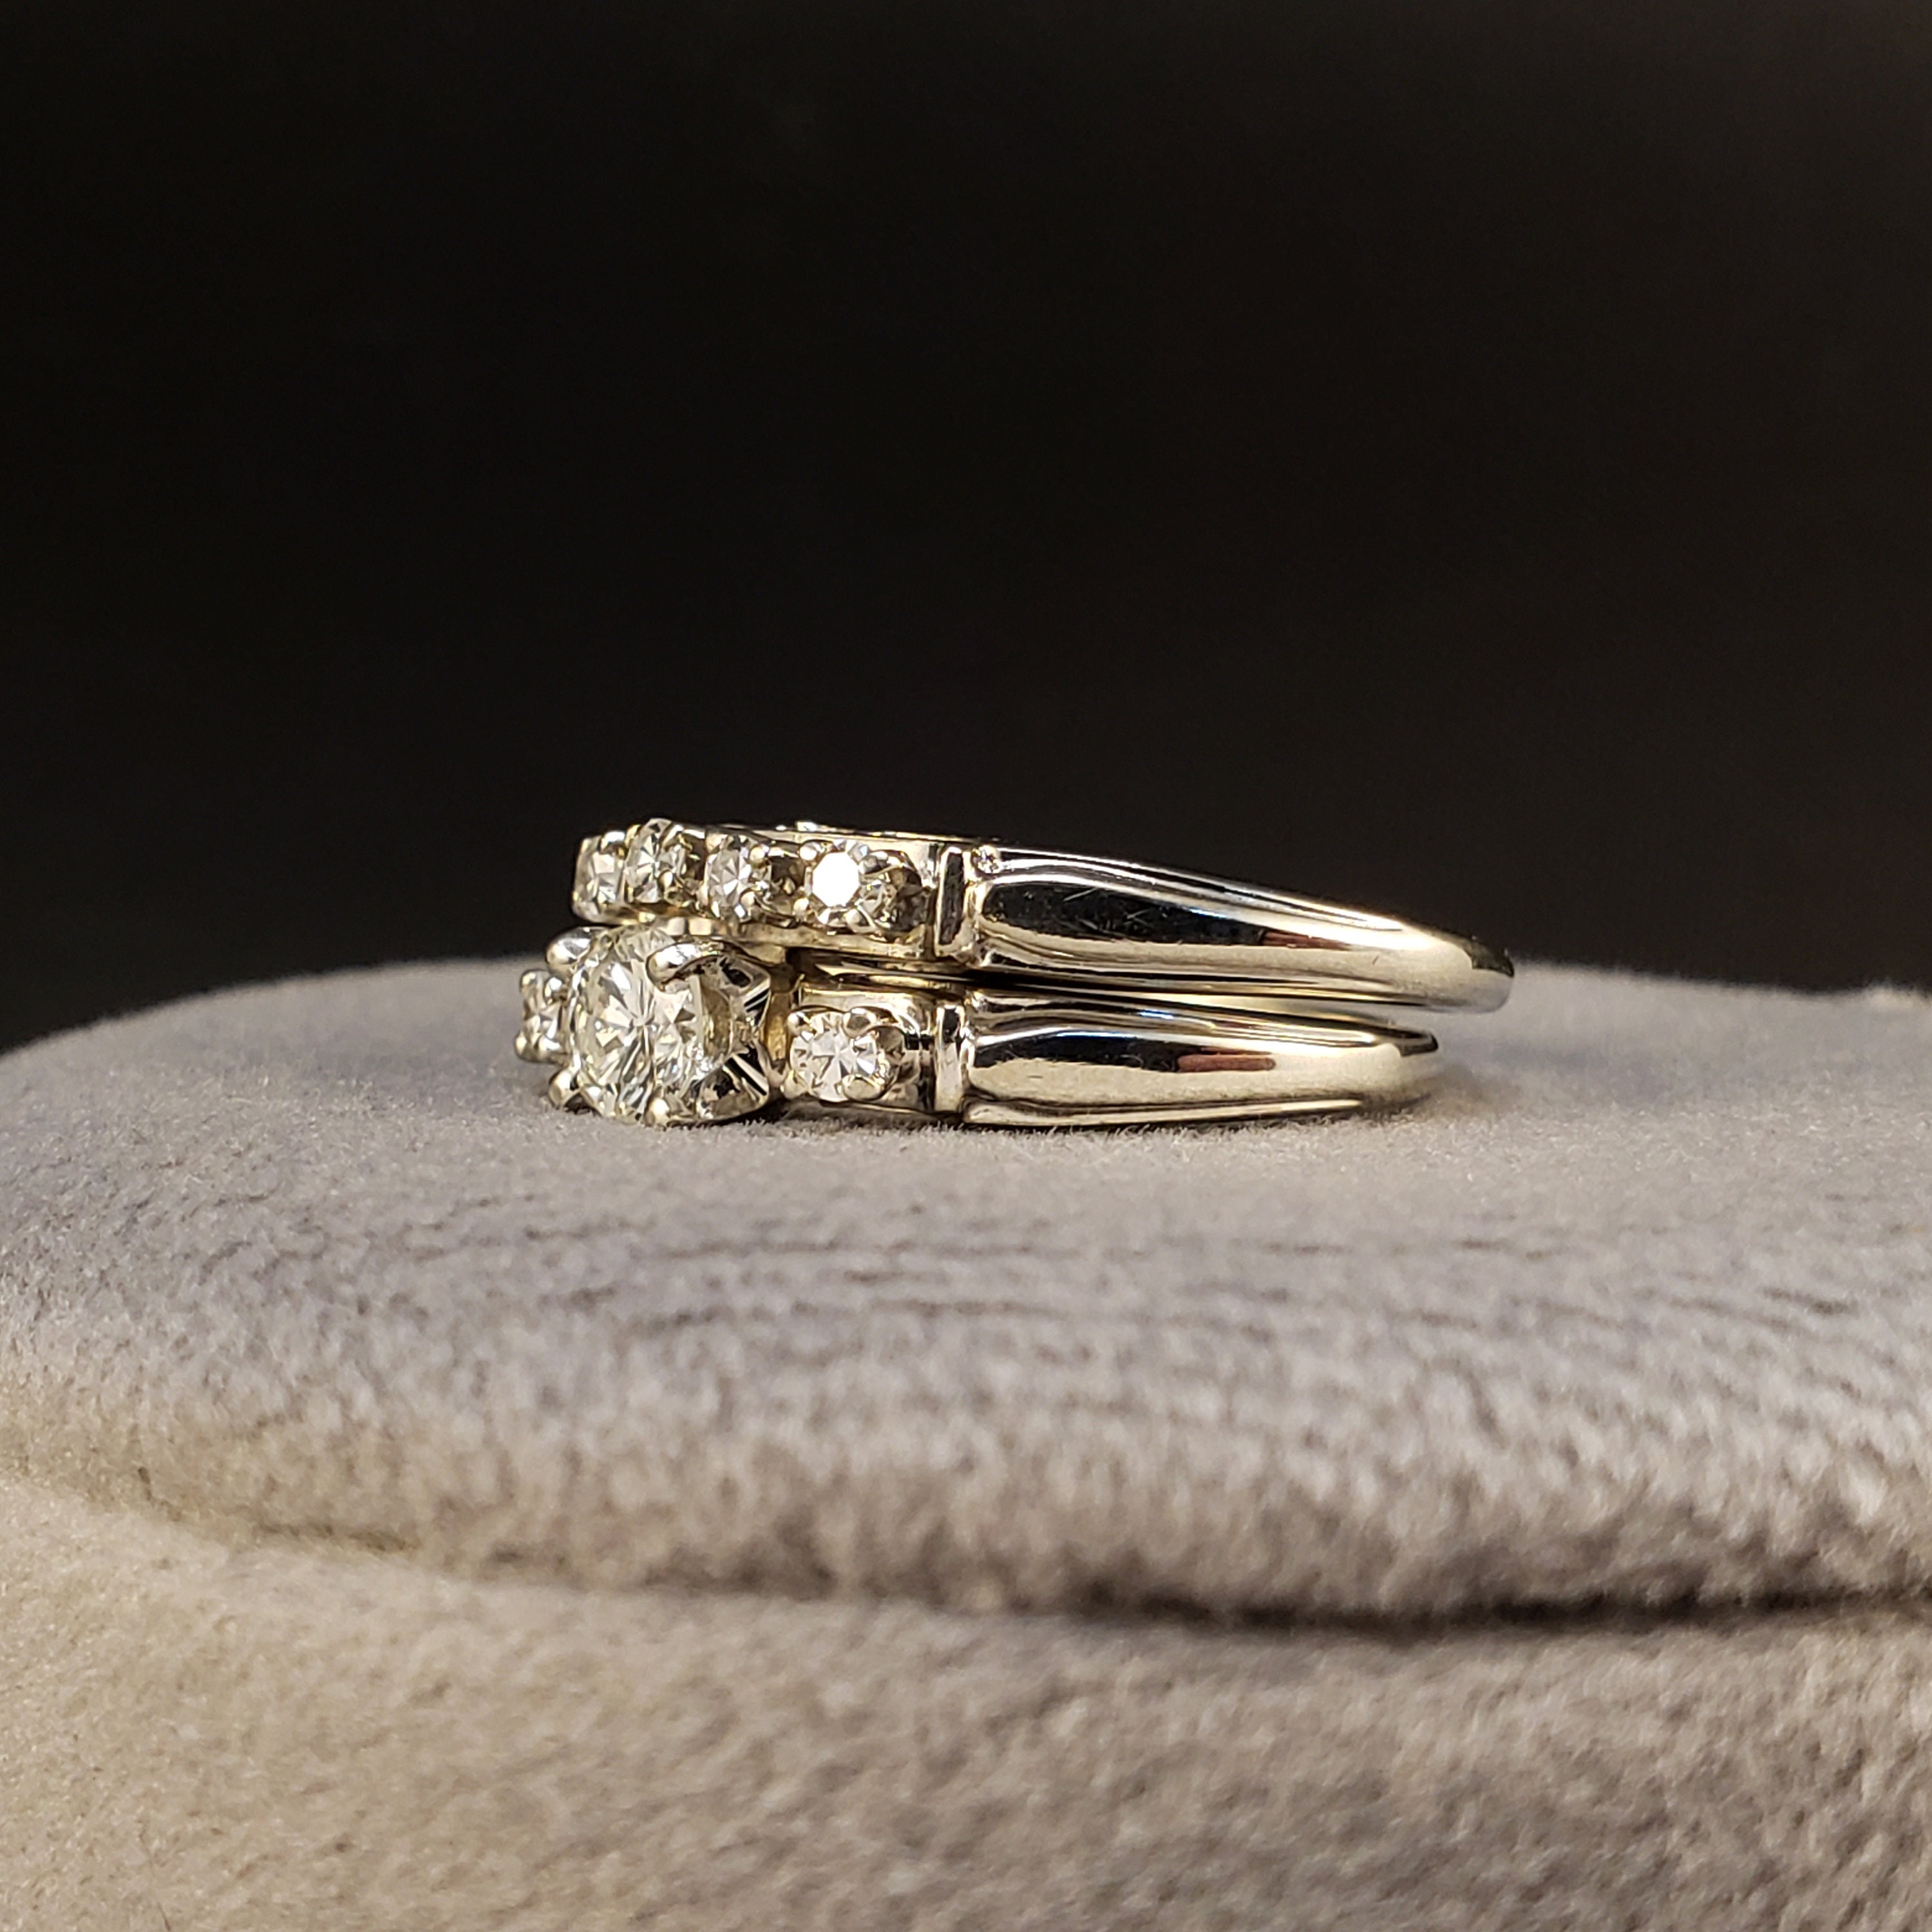 Vintage 1940s Diamond Solitaire Engagement Ring